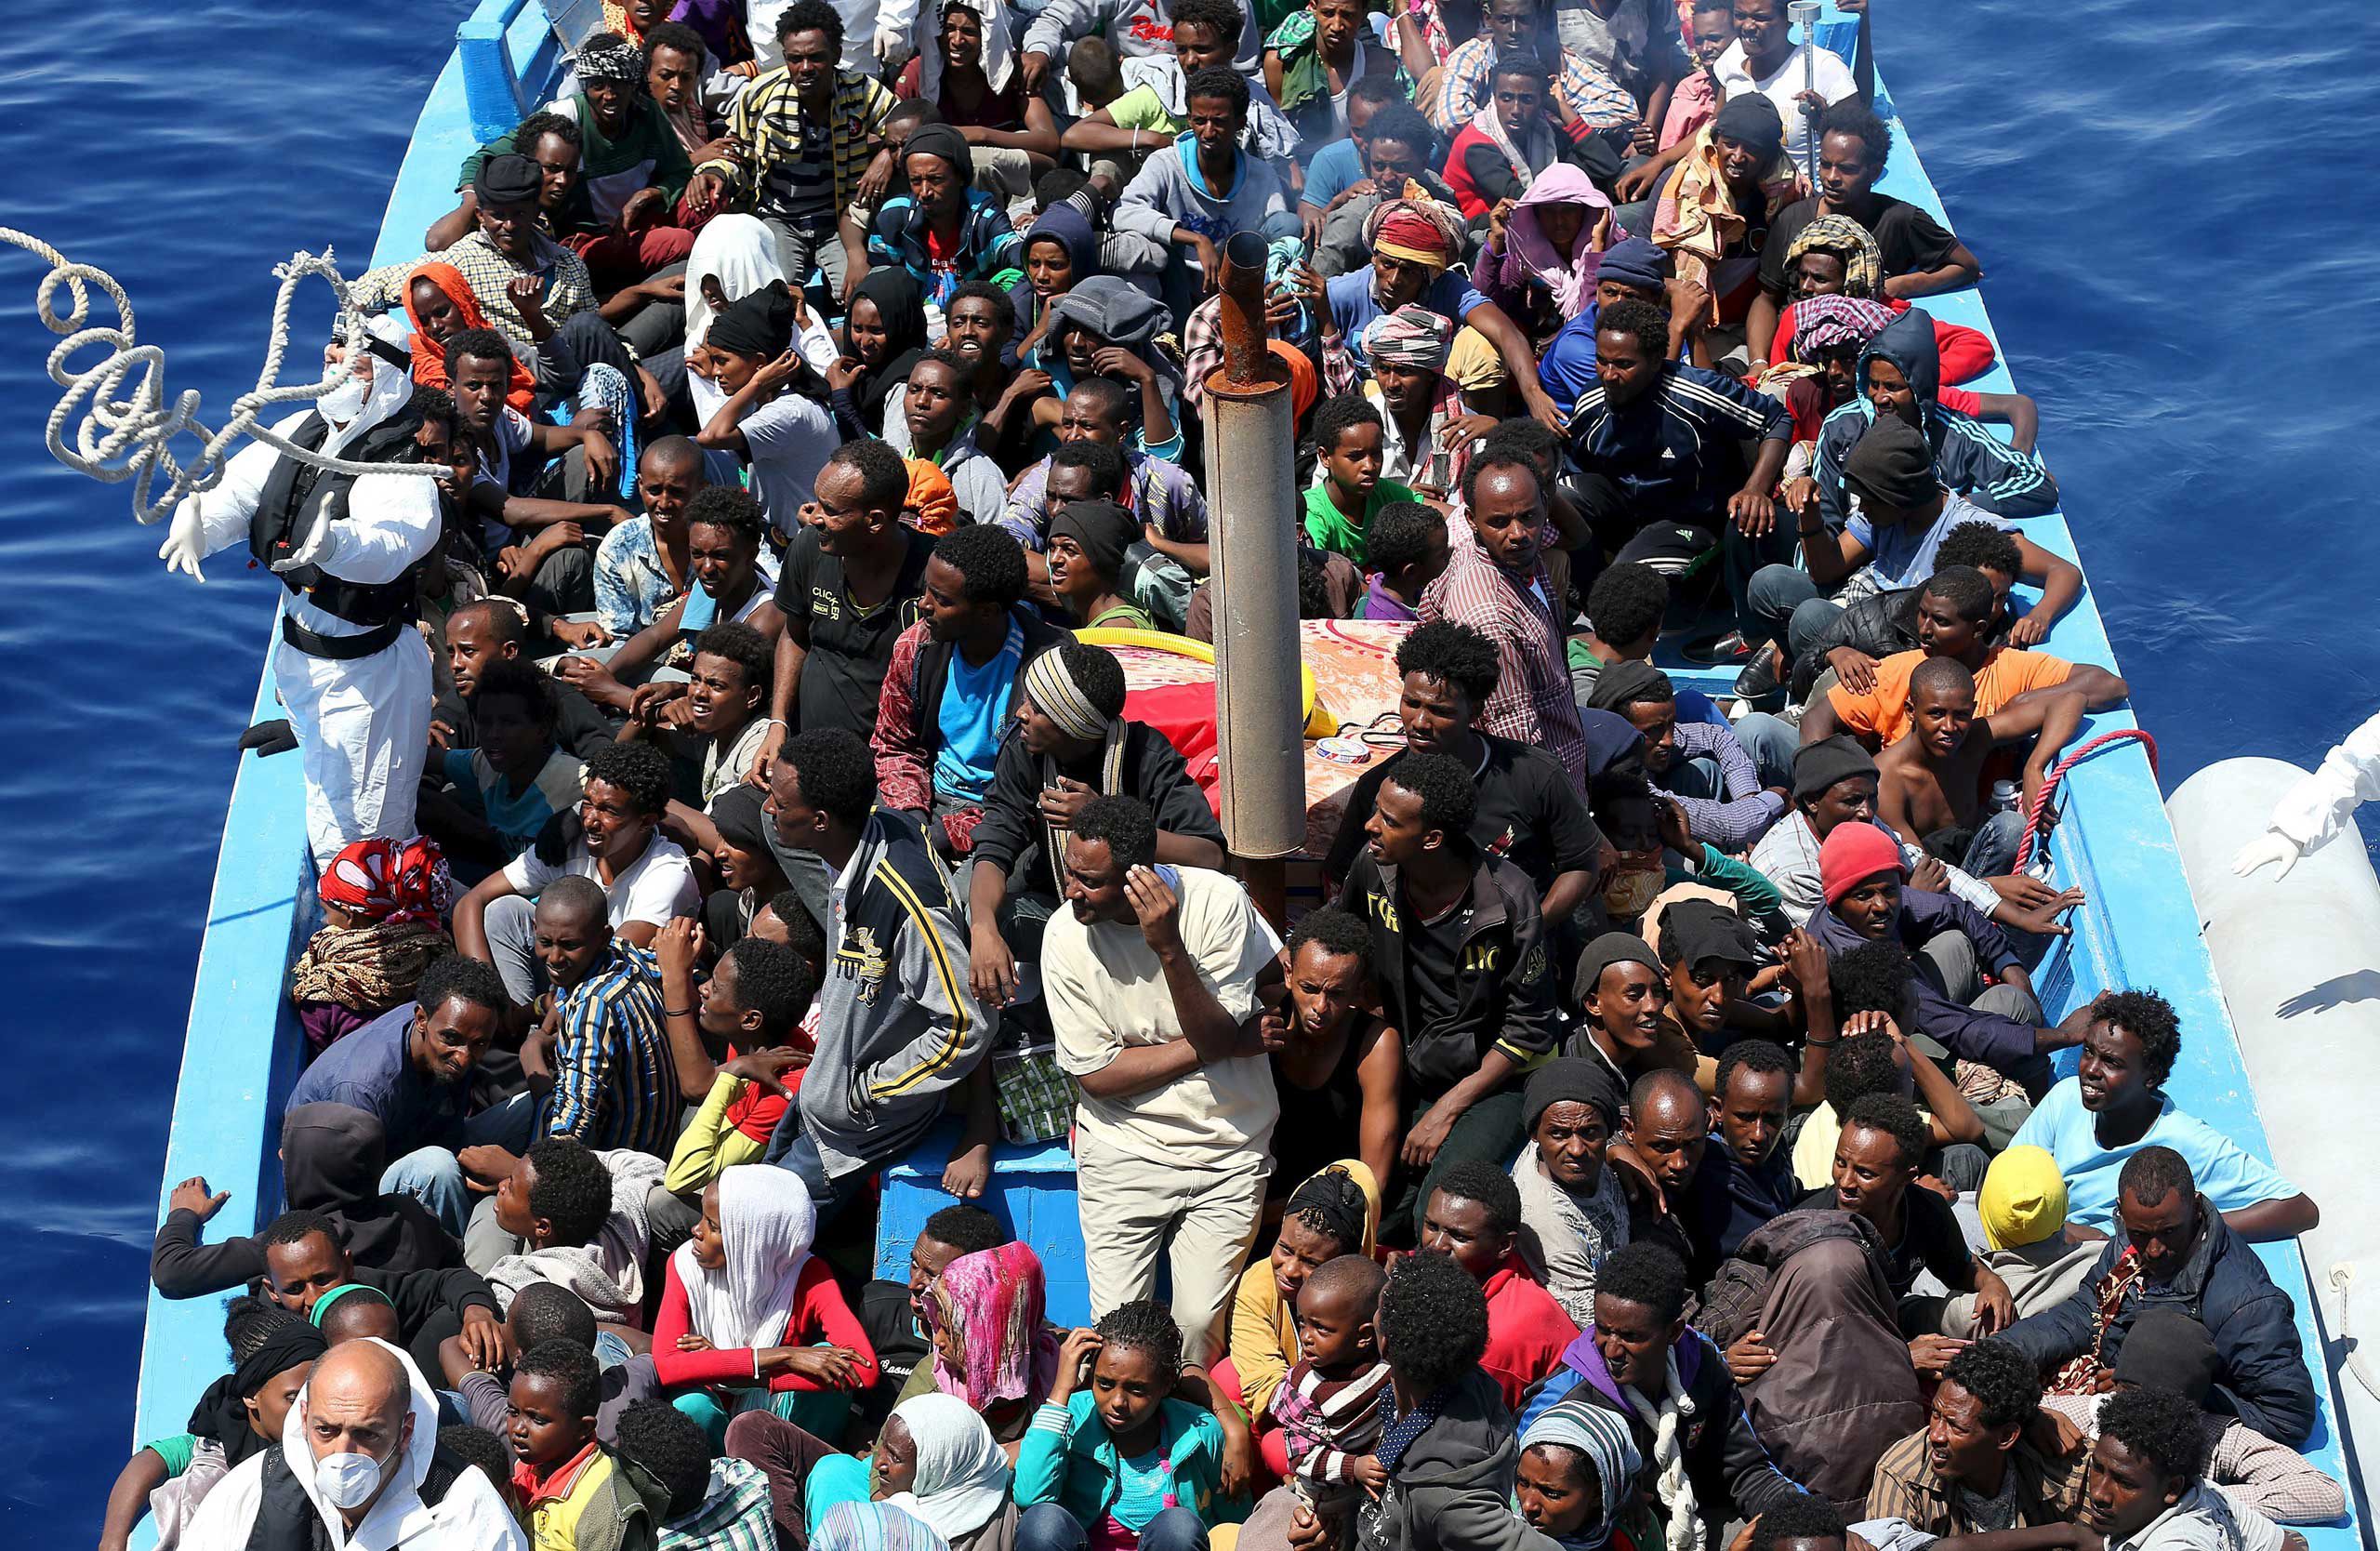 Tunisian Migration to Italy Reaches New High With Over 13,000 Migrants So Far in 2022 | The African Exponent.